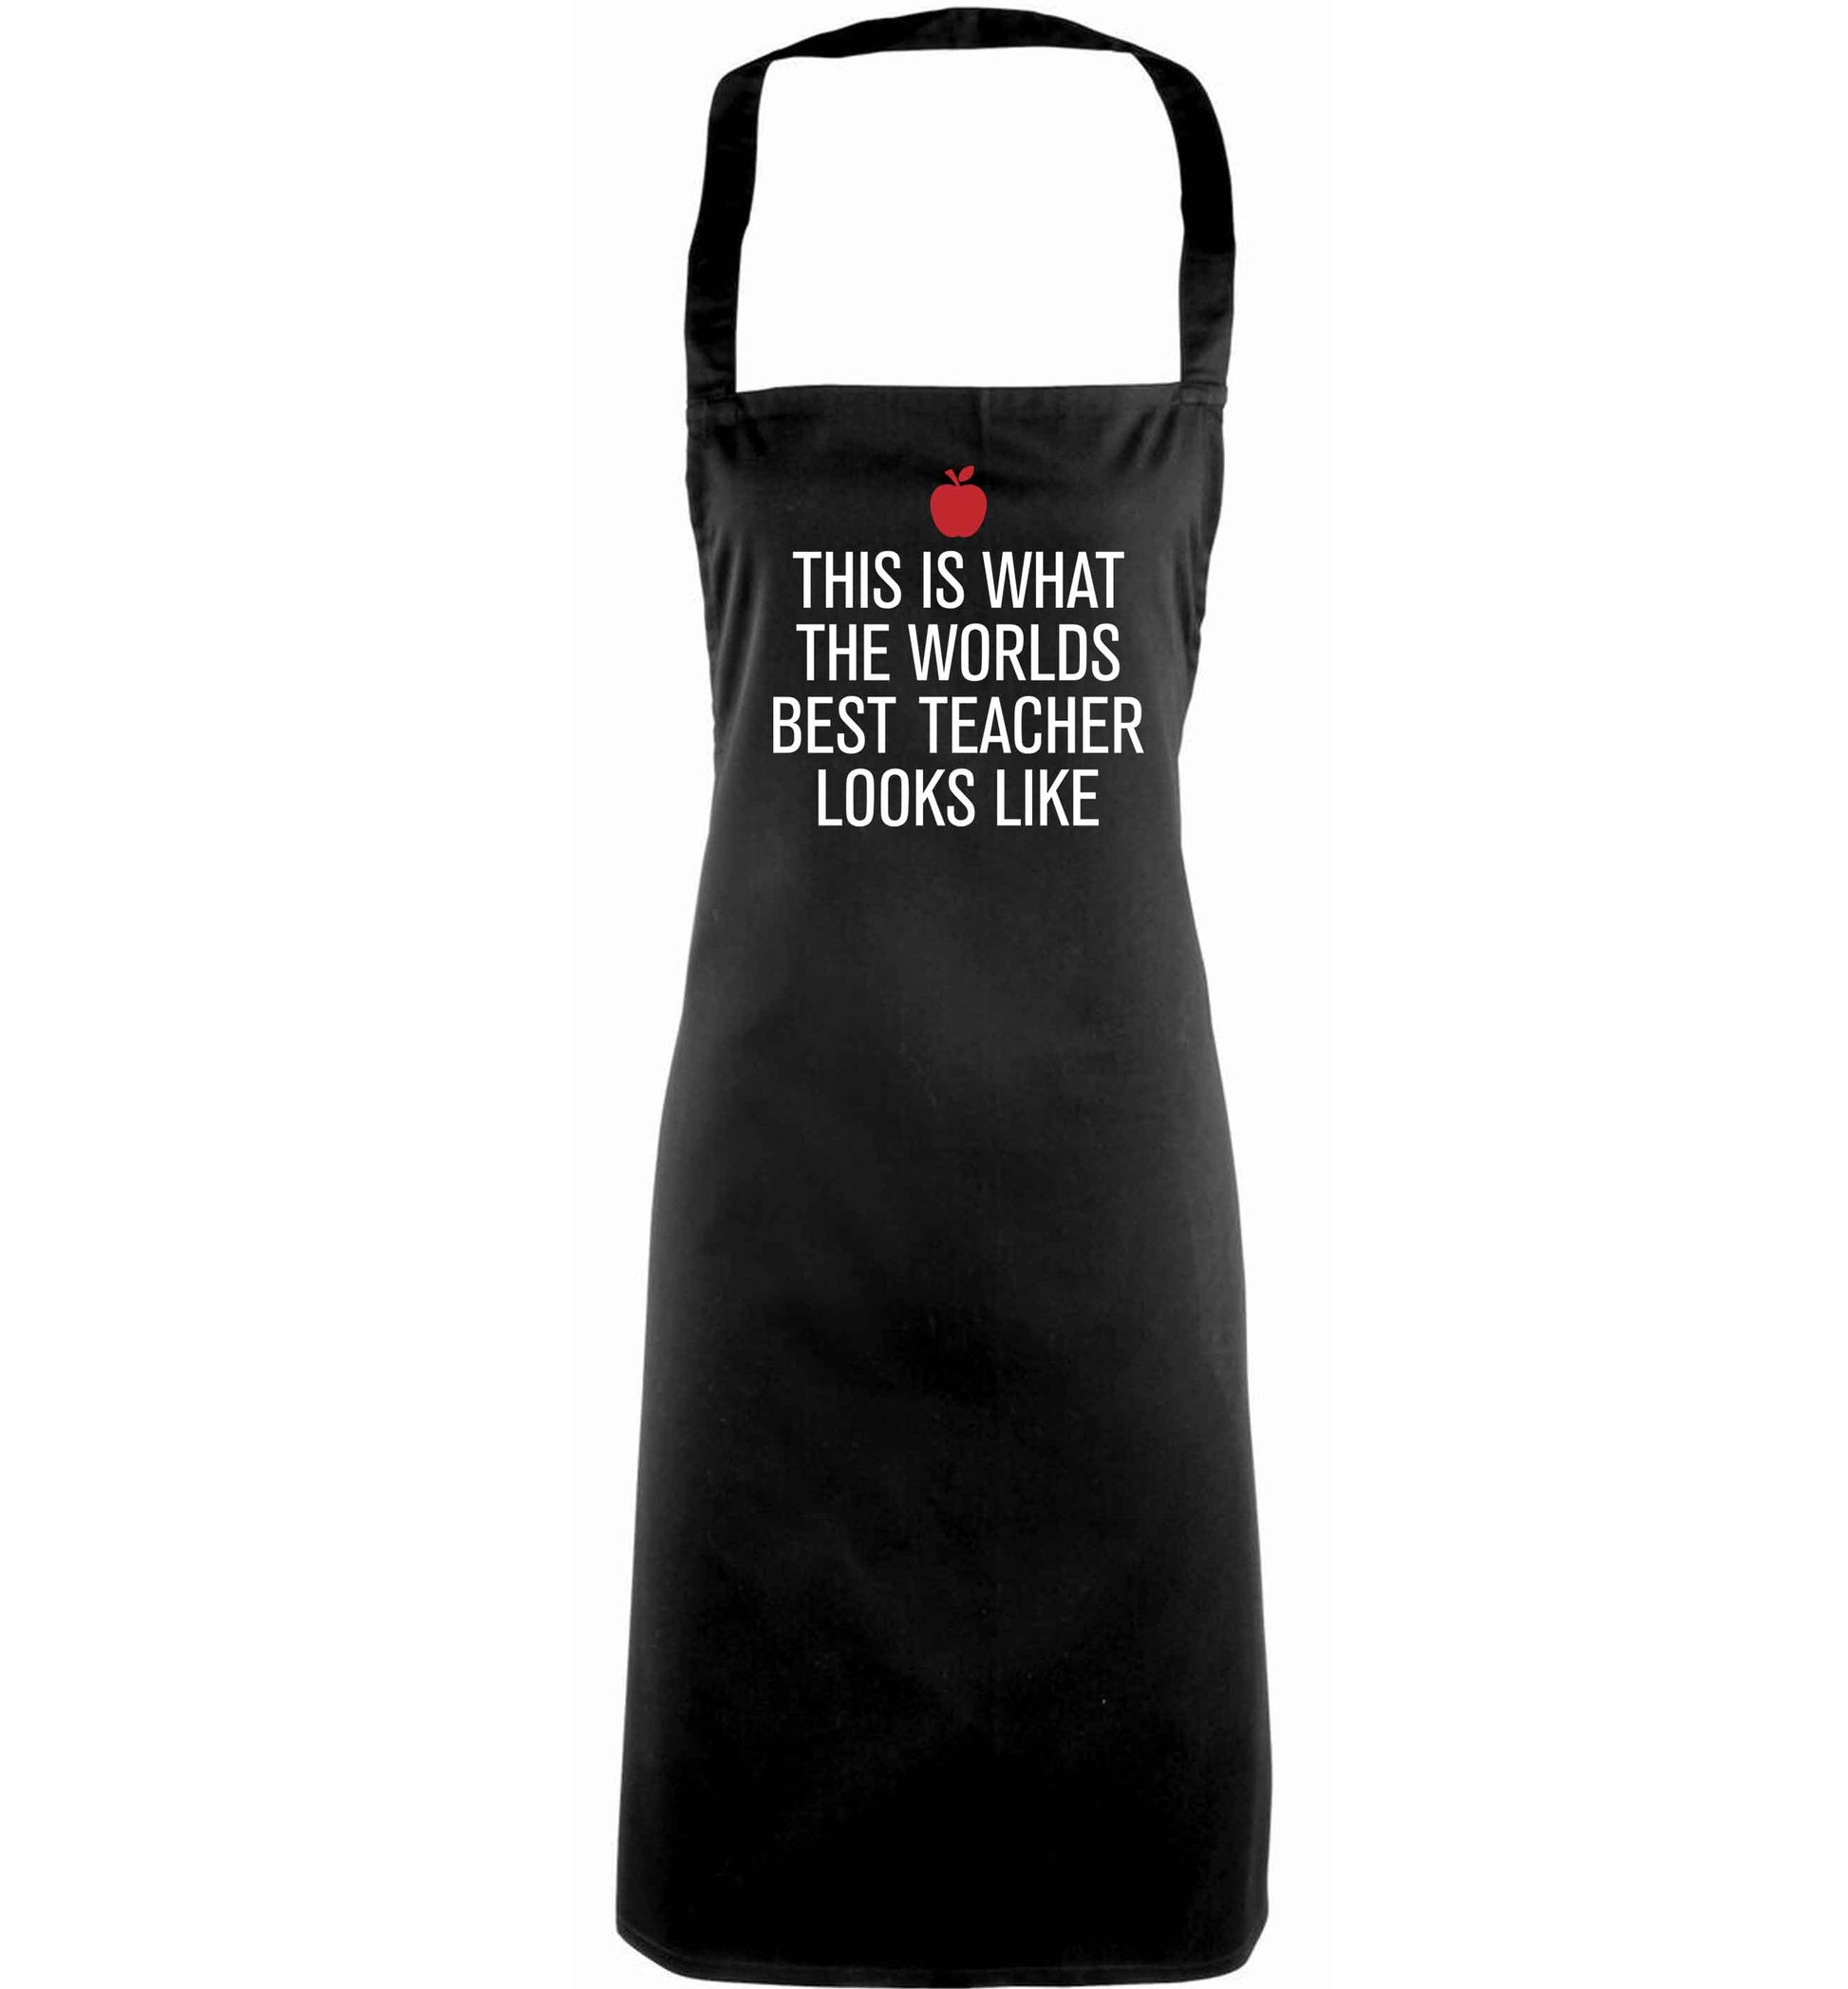 This is what the worlds best teacher looks like adults black apron